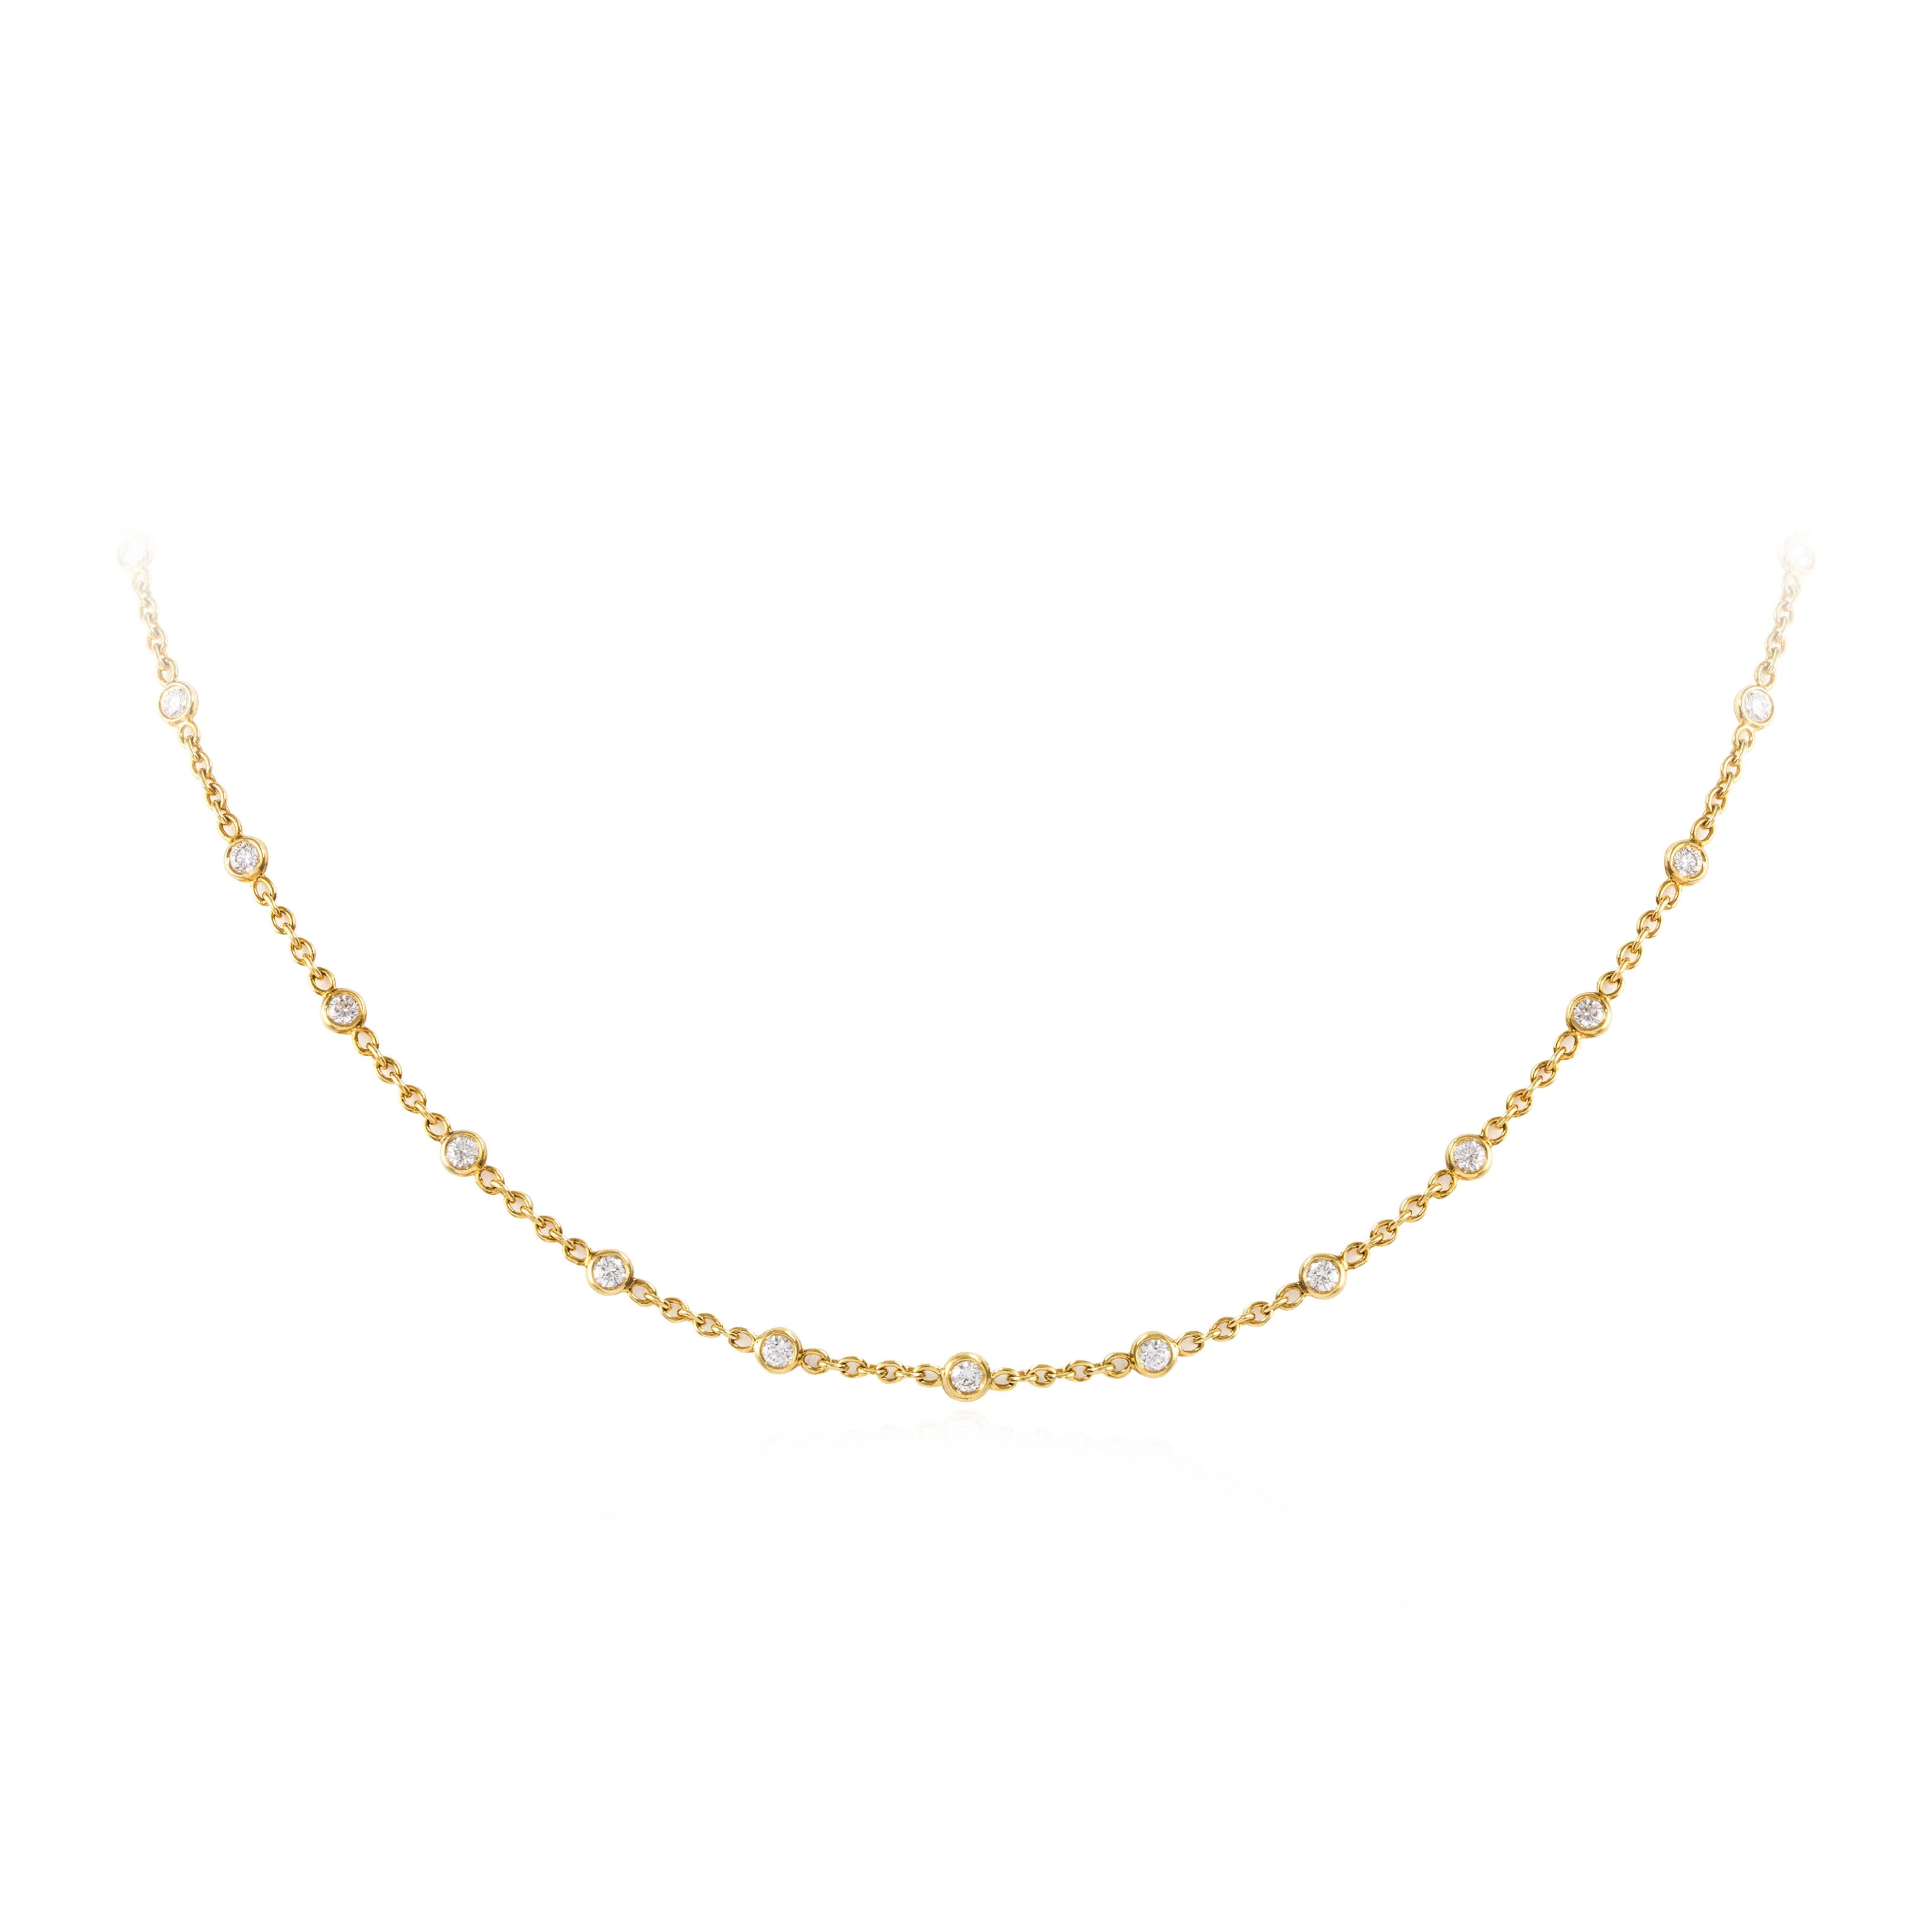 Roman Malakov 1.12 Carat Total Round Diamond by the Yard Necklace in Yellow Gold